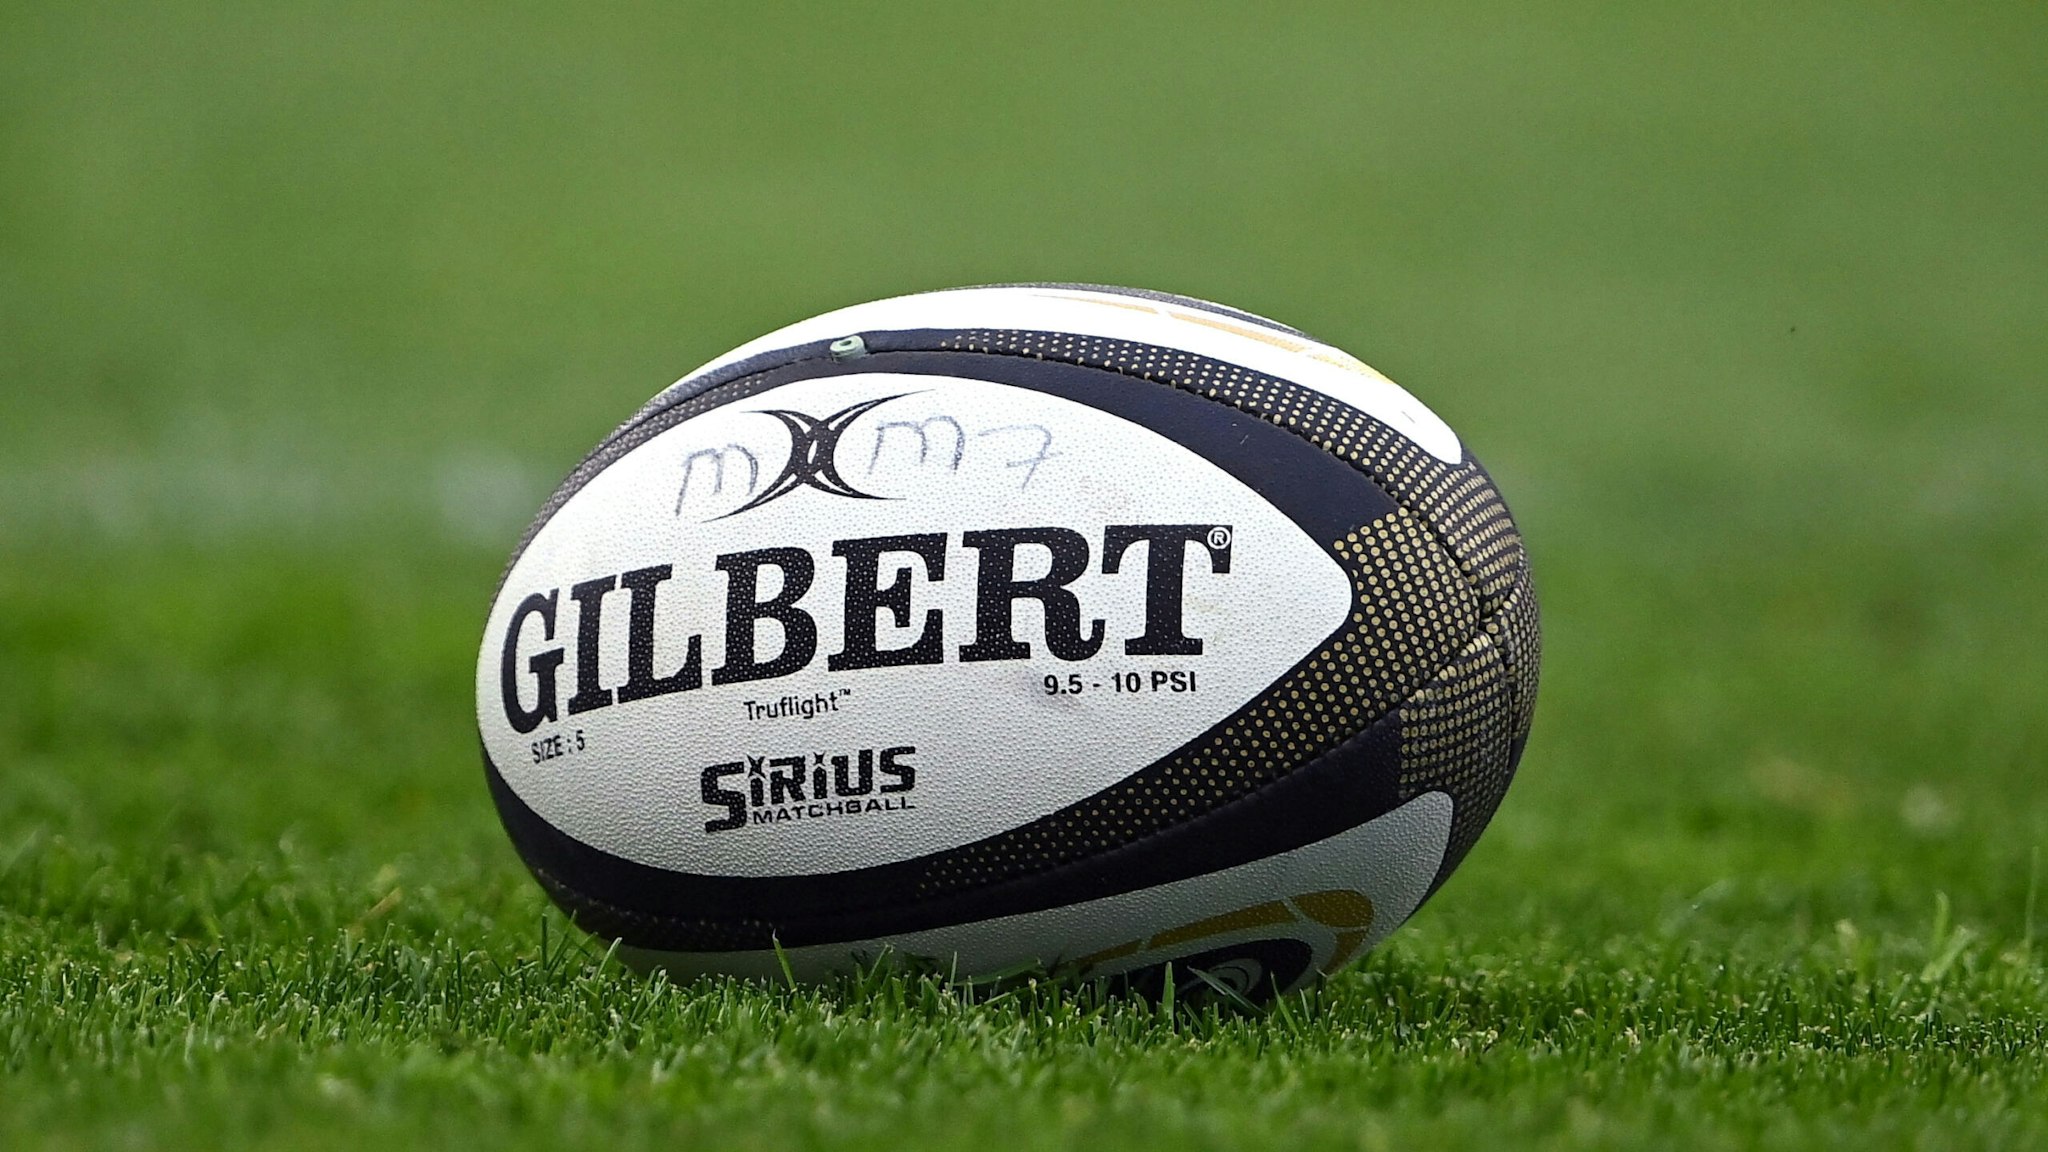 Limerick , Ireland - 28 May 2021; A general view of a rugby ball before the Guinness PRO14 Rainbow Cup match between Munster and Cardiff Blues at Thomond Park in Limerick.